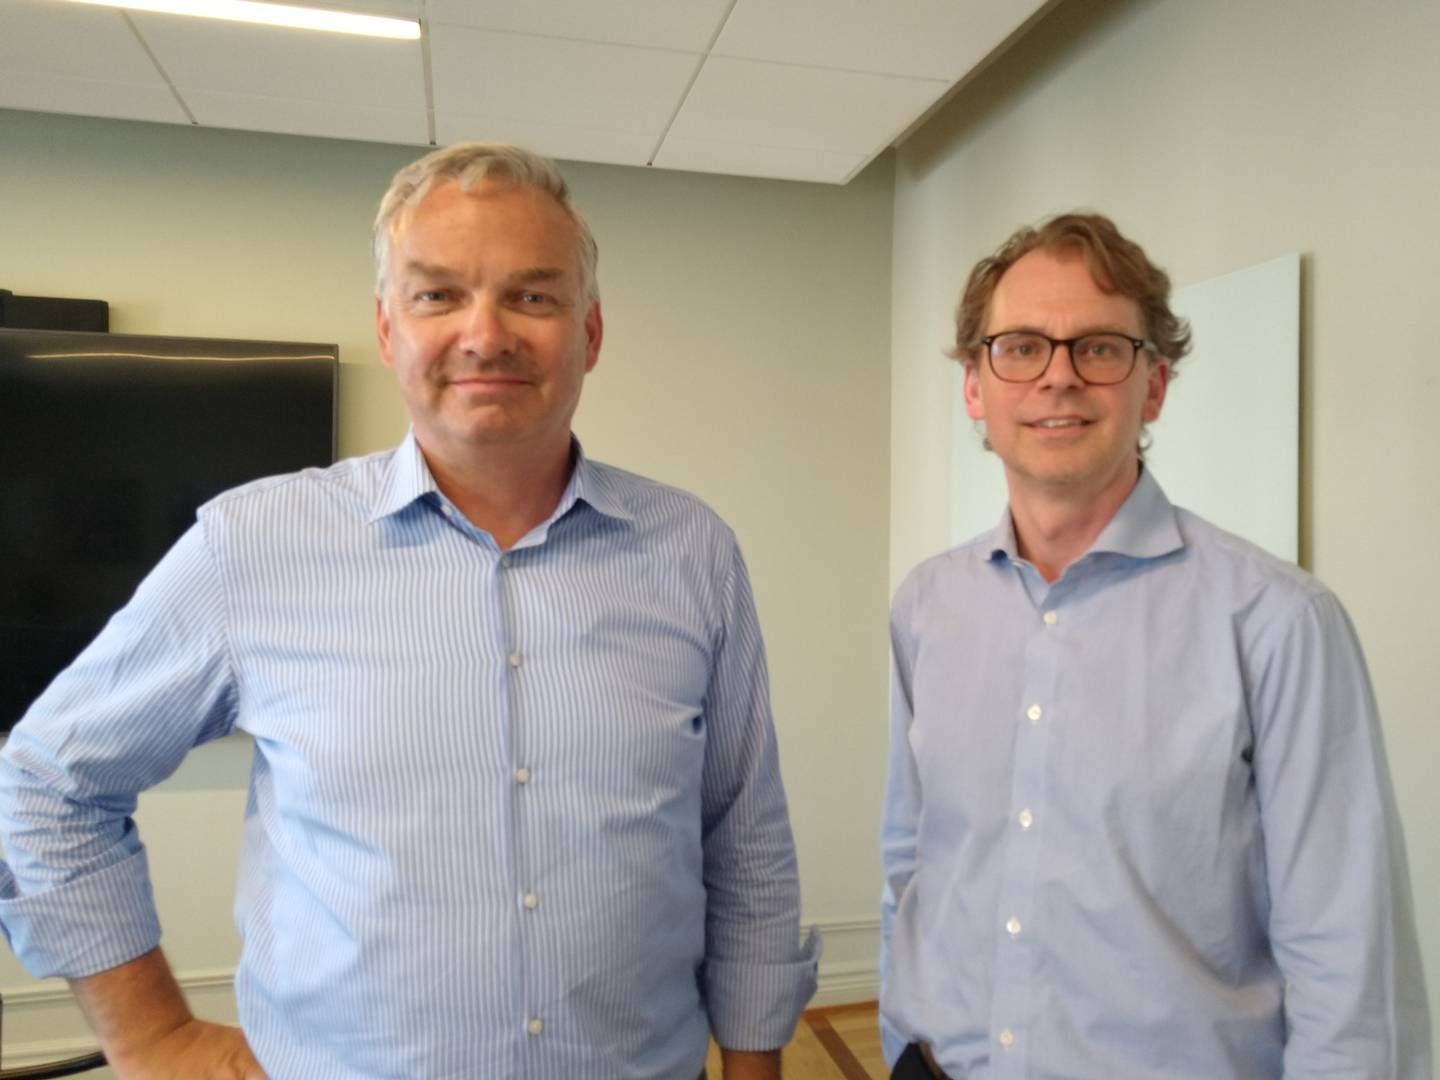 Mats Langensjö (left) with his close associate Claes Green. Together, they will be lead consultants on the performance review of the AP funds. | Photo: AMWatch / Kim Wiesener